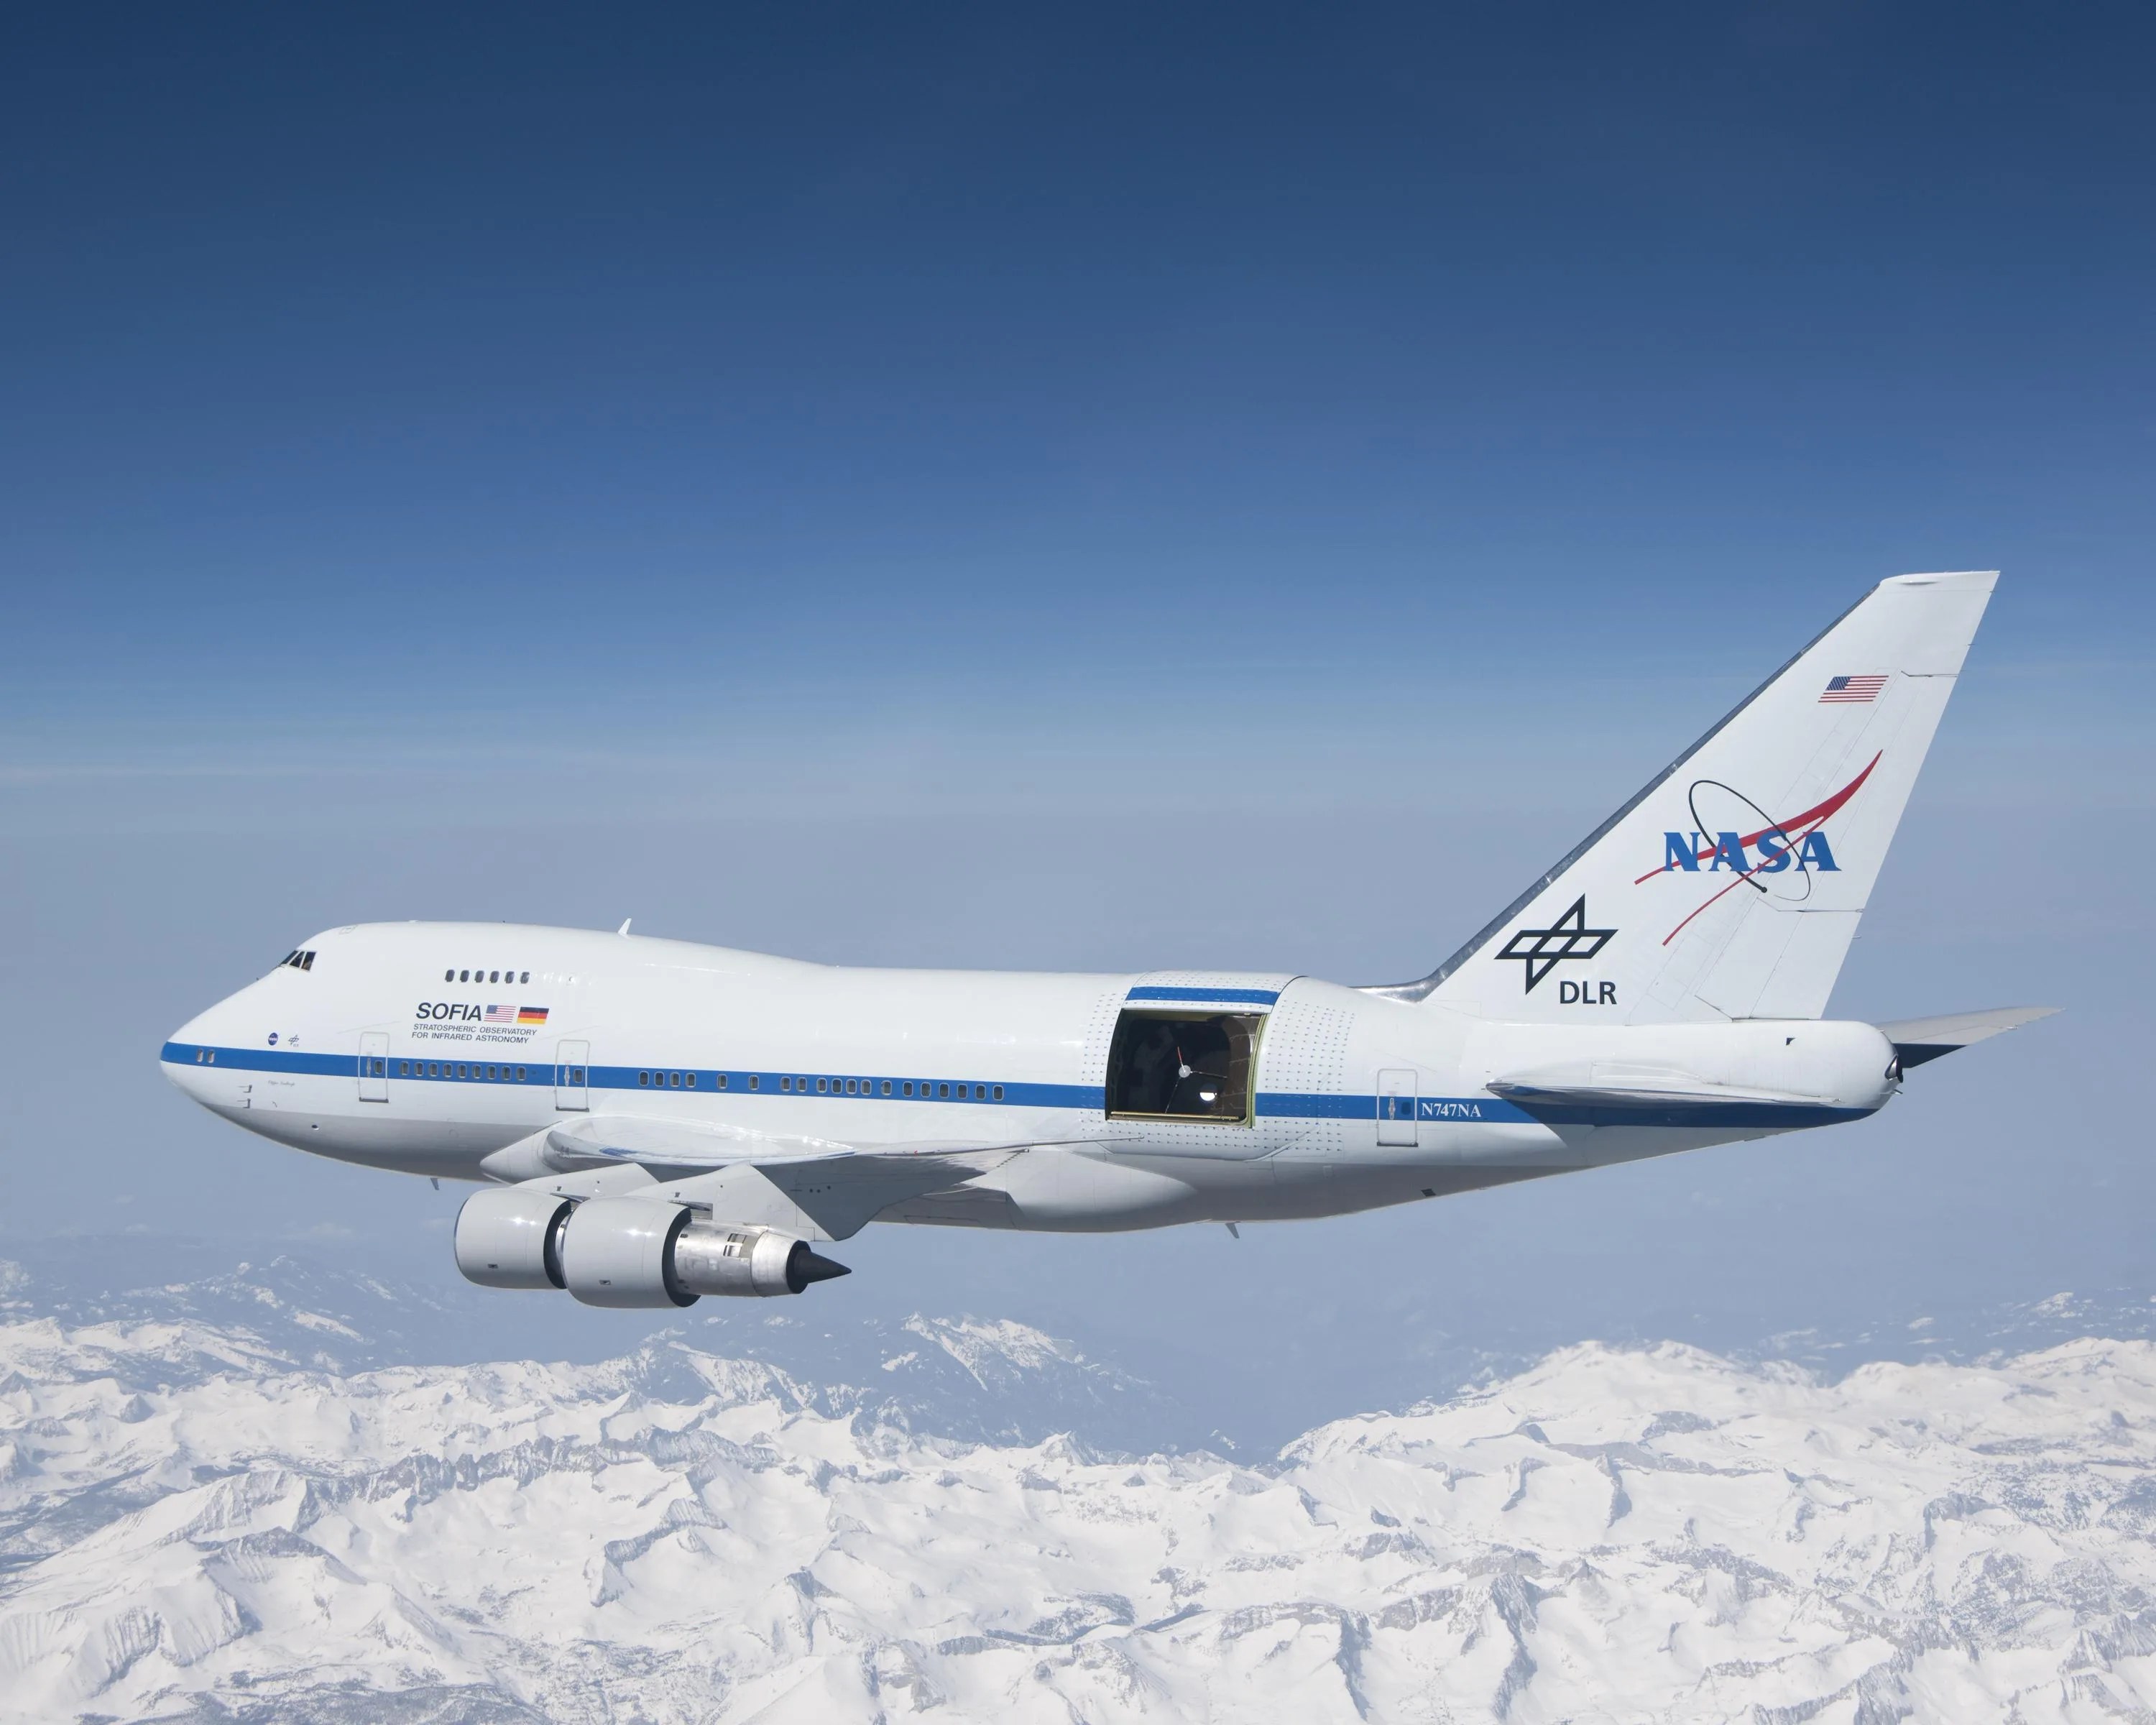 SOFIA soars over the snow-covered Sierra Nevada mountains with its telescope door open during a test flight.